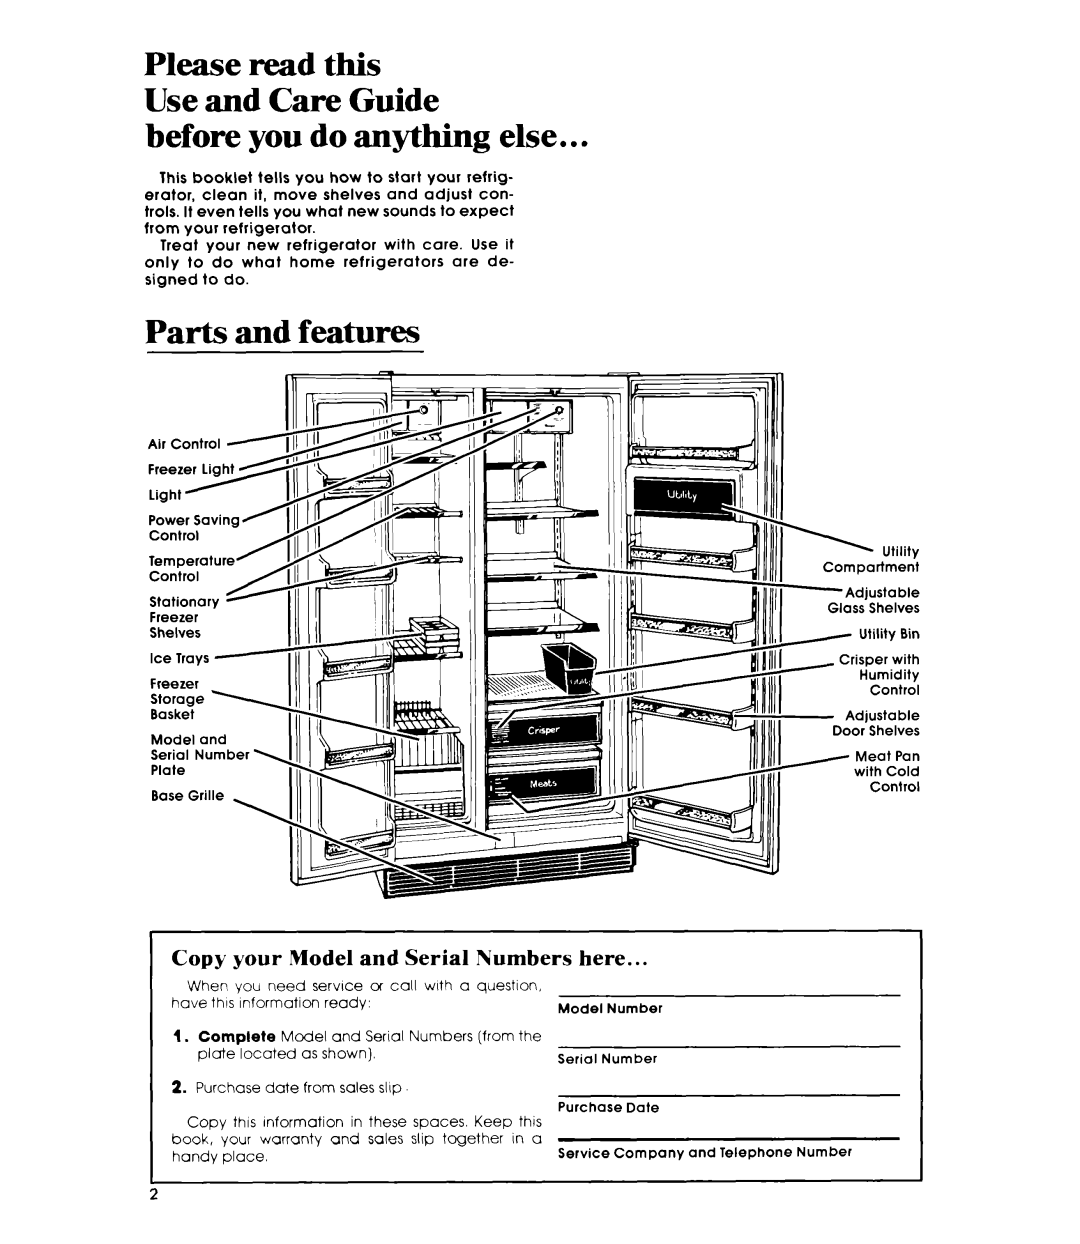 Whirlpool ED26MK manual before you do anything else, Parts and features, Please read this Use and Care Guide 